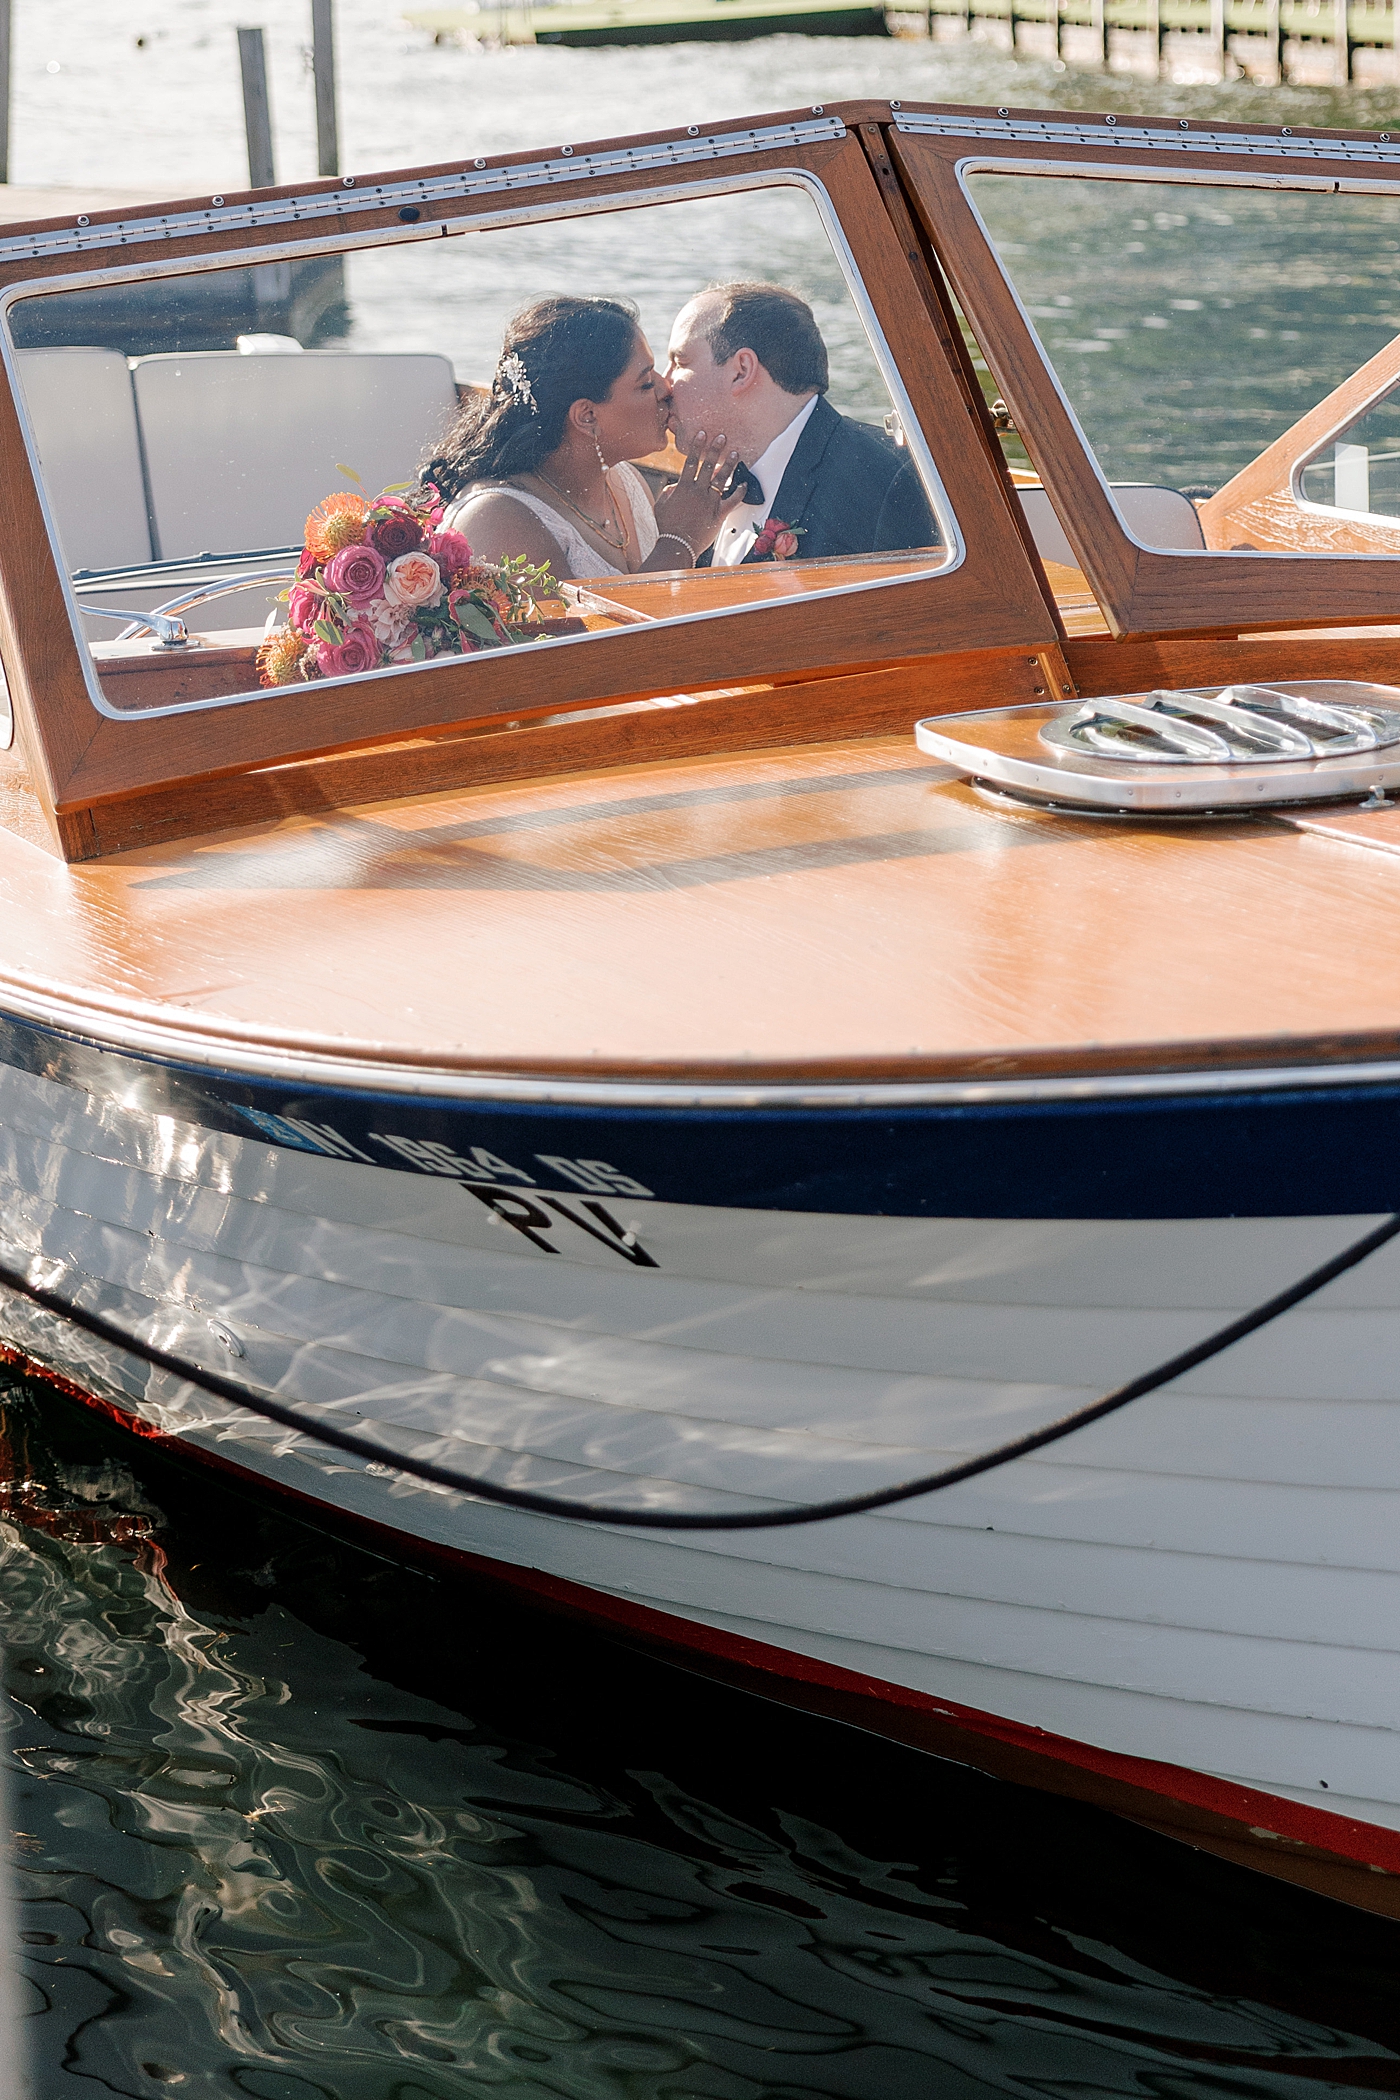 Bride and groom kissing on a wooden boat | Image by Hope Helmuth Photography